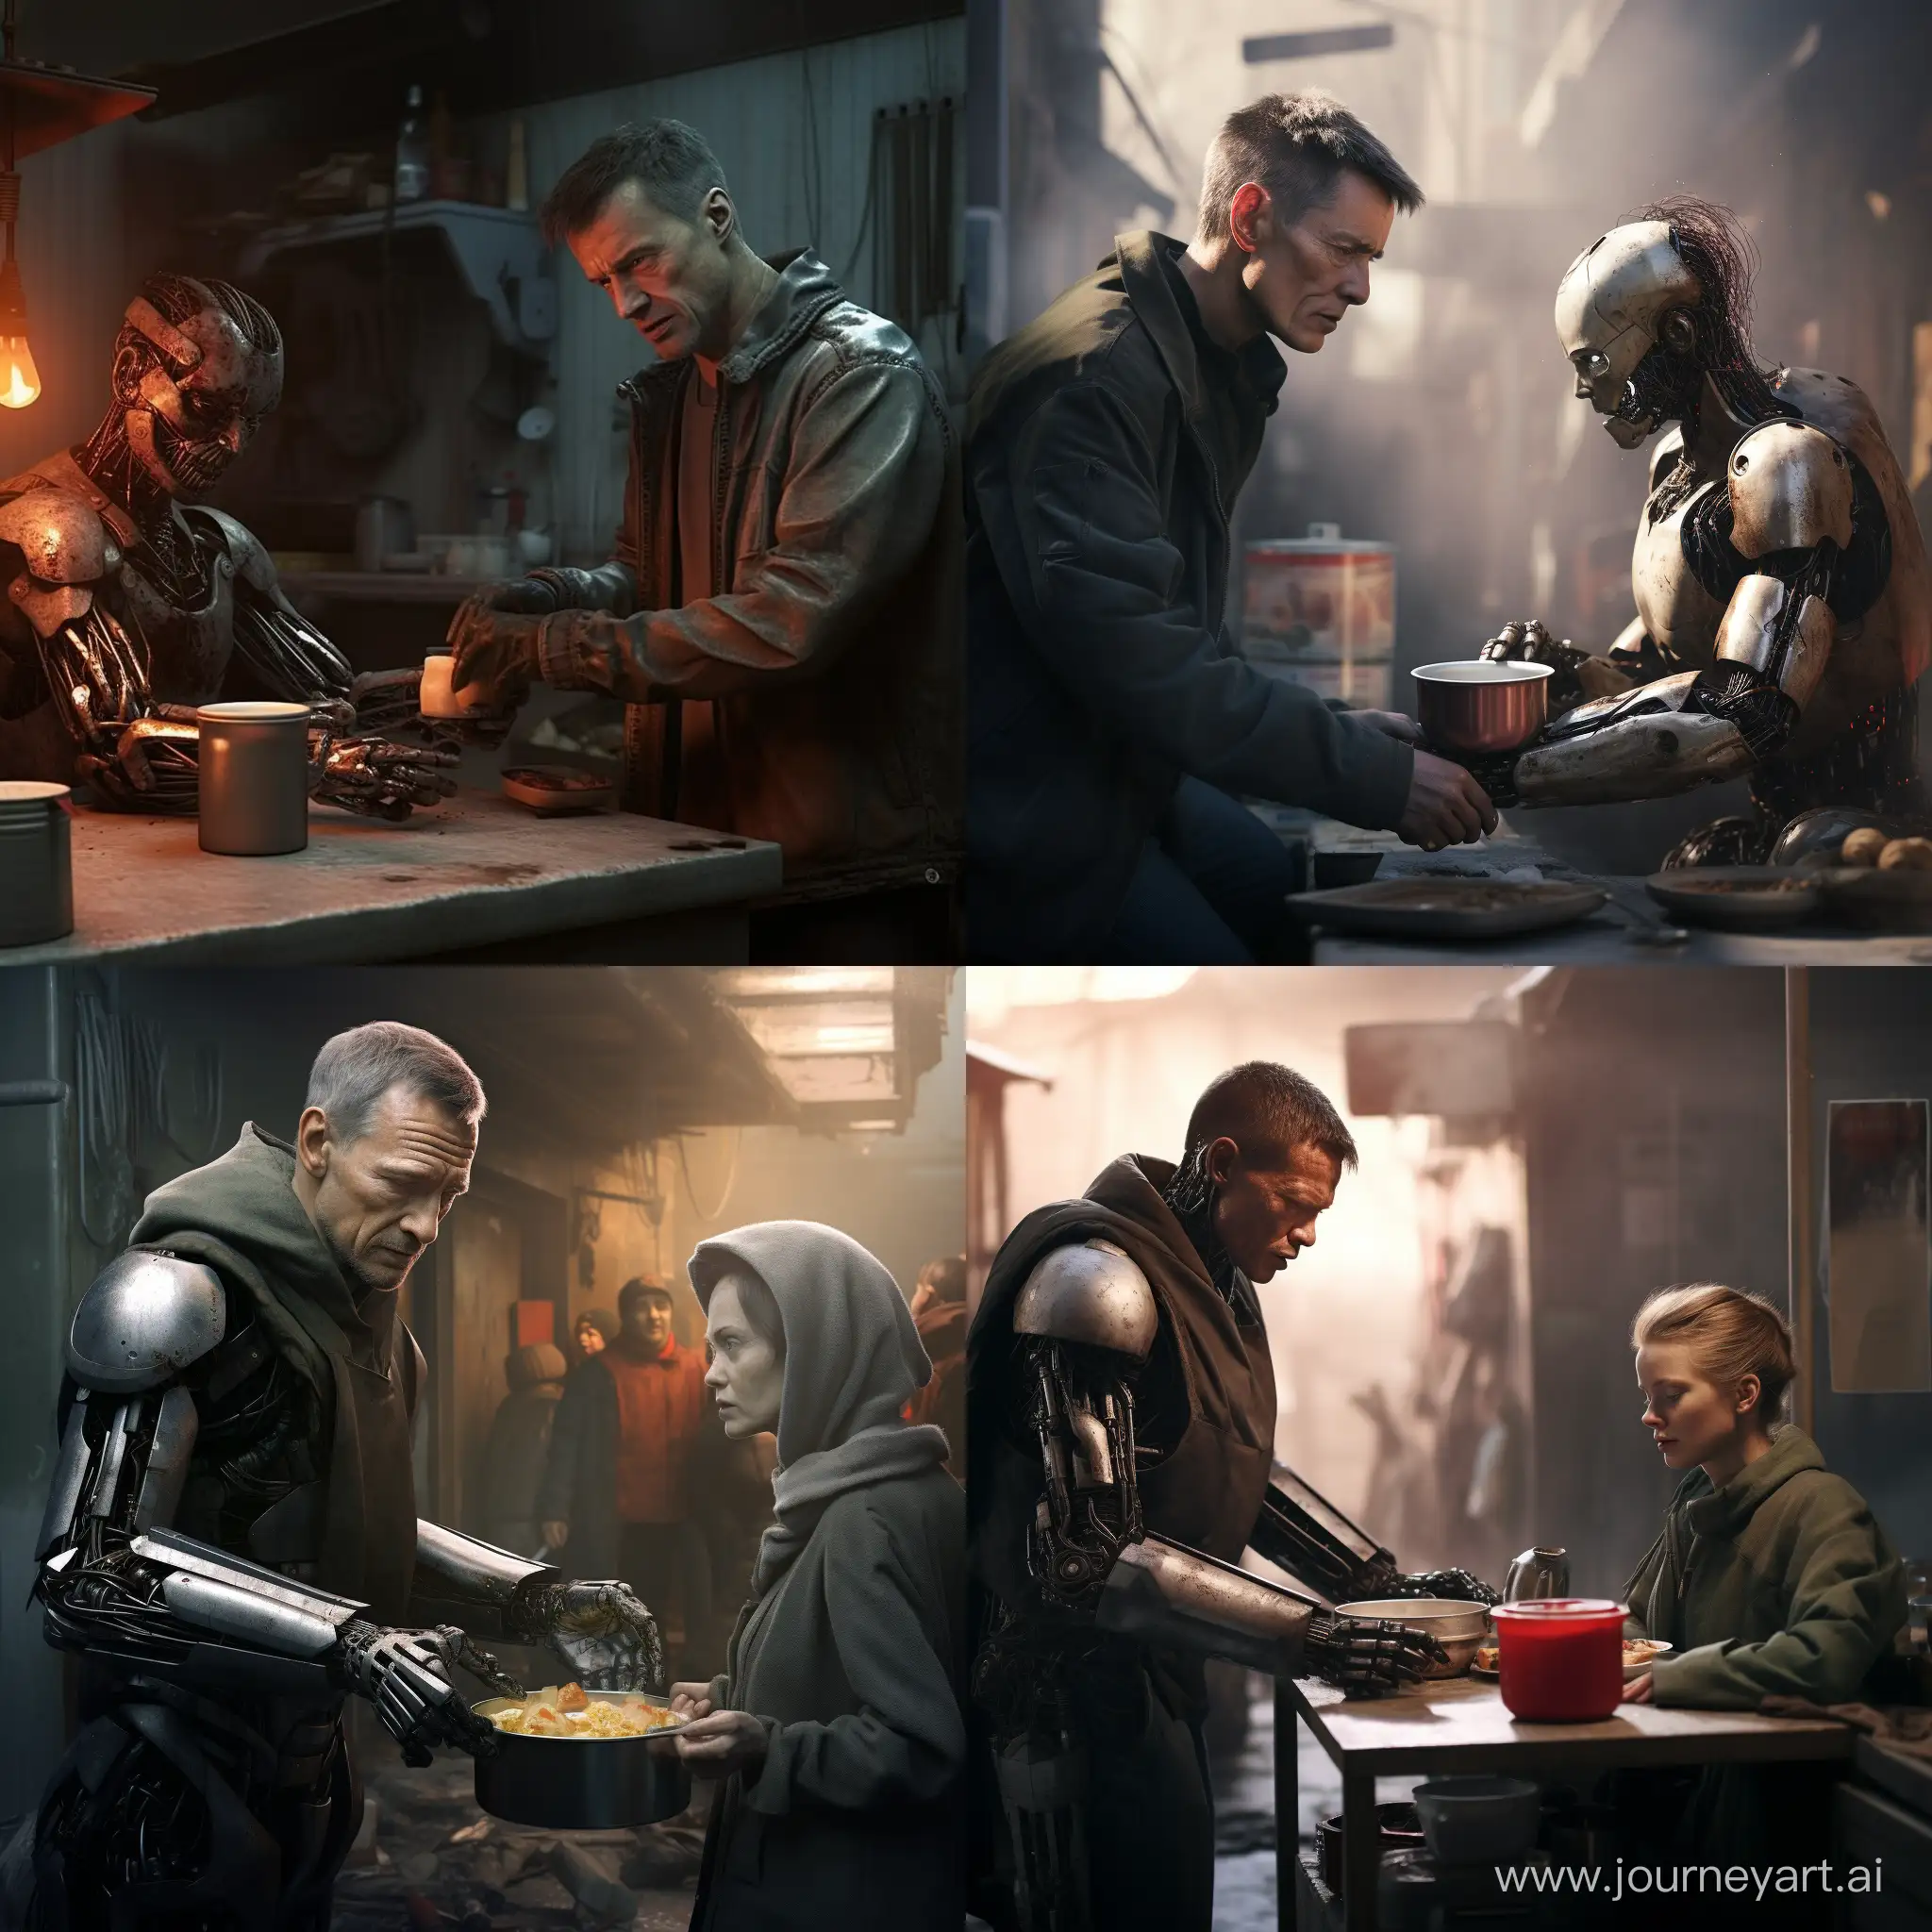 Terminator-Serving-Soup-to-the-Homeless-in-a-Realistic-Kitchen-Scene